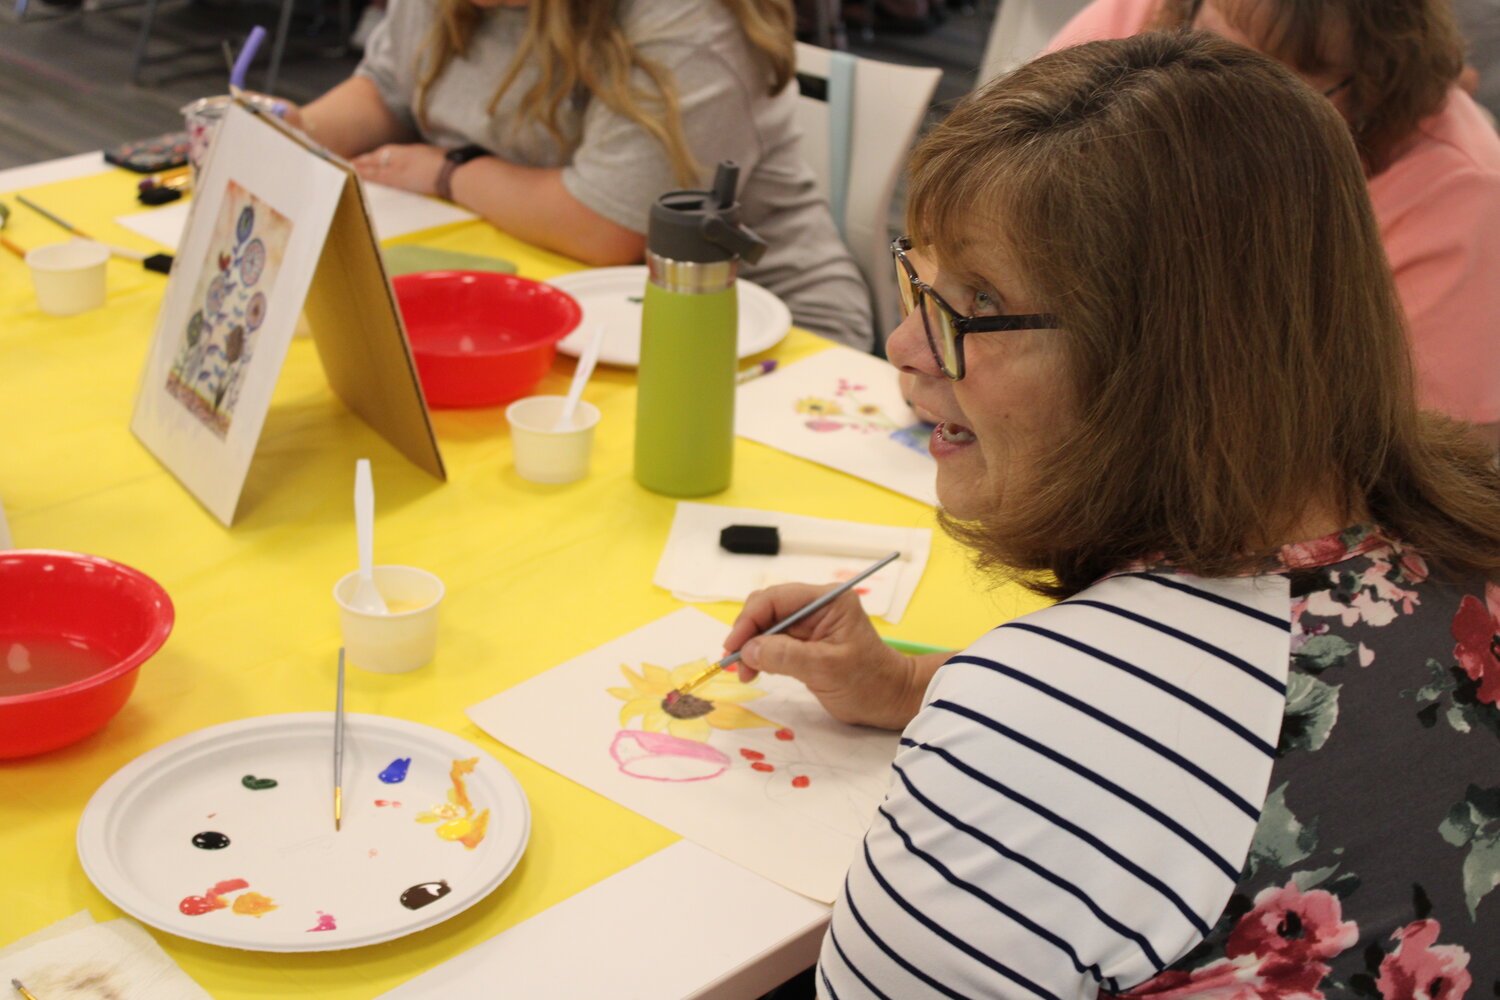 Kim Barnes works on her watercolor painting.